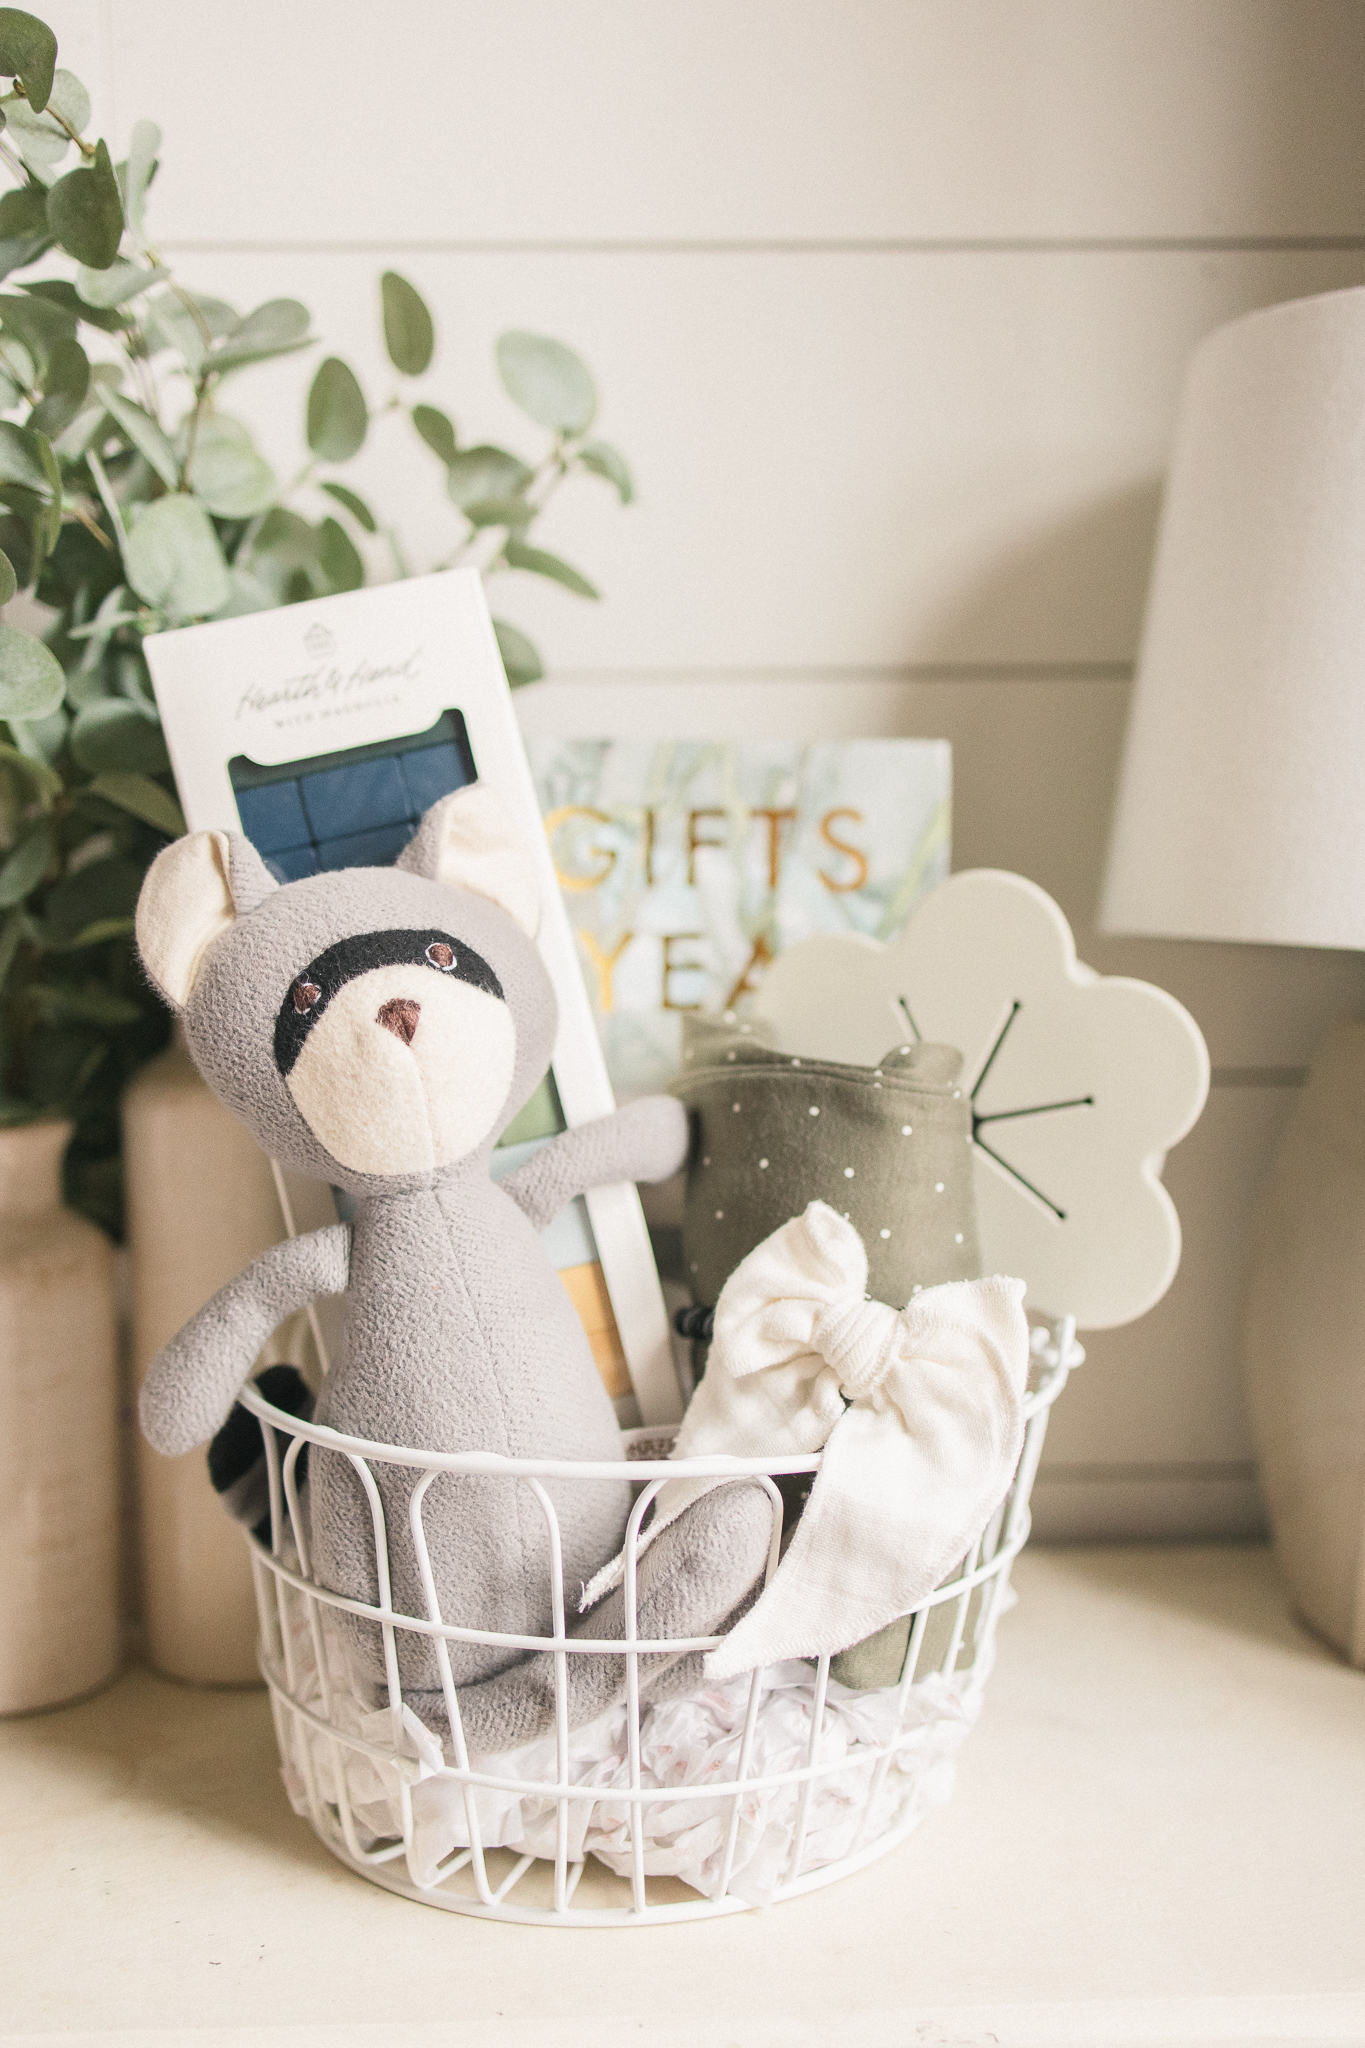 white wire basket with hair bow, olive dot pajamas, stuffed animal, book, and wooden stacking game inside